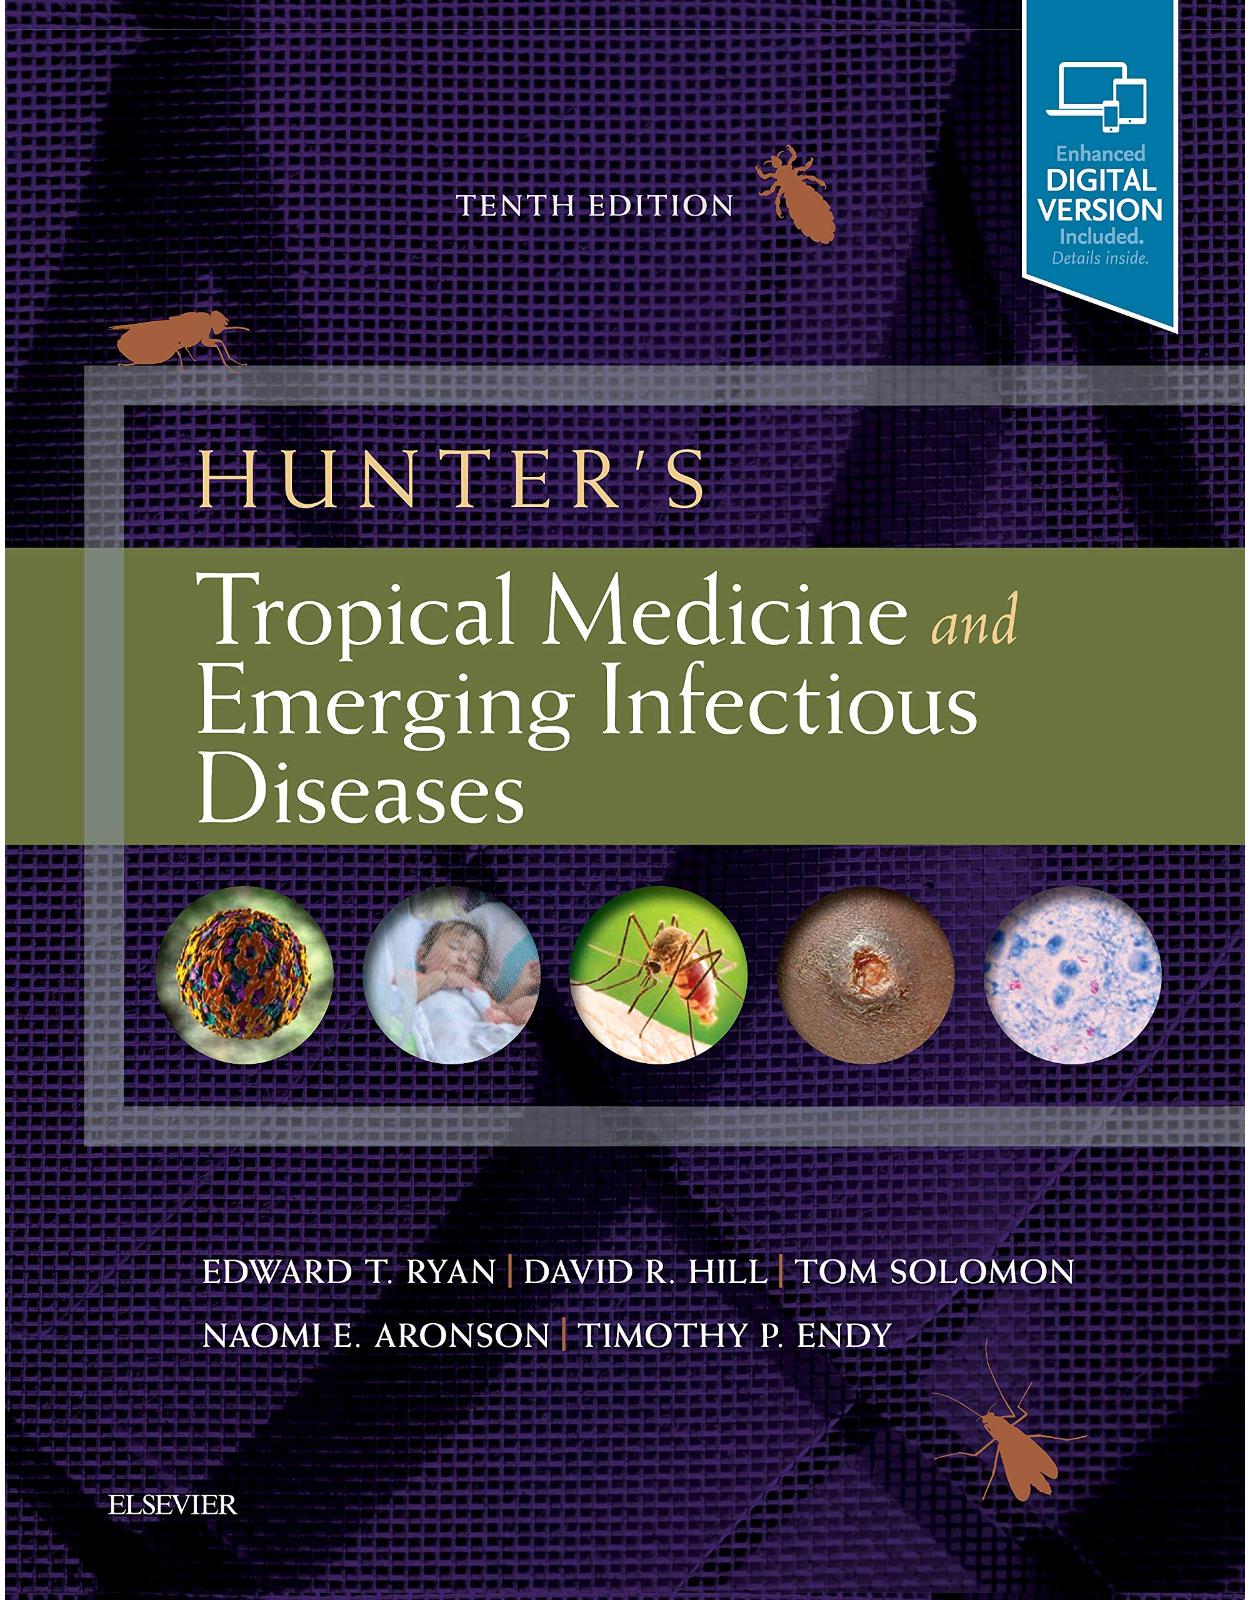 Hunter’s Tropical Medicine and Emerging Infectious Disease, 10e: Expert Consult - Online and Print